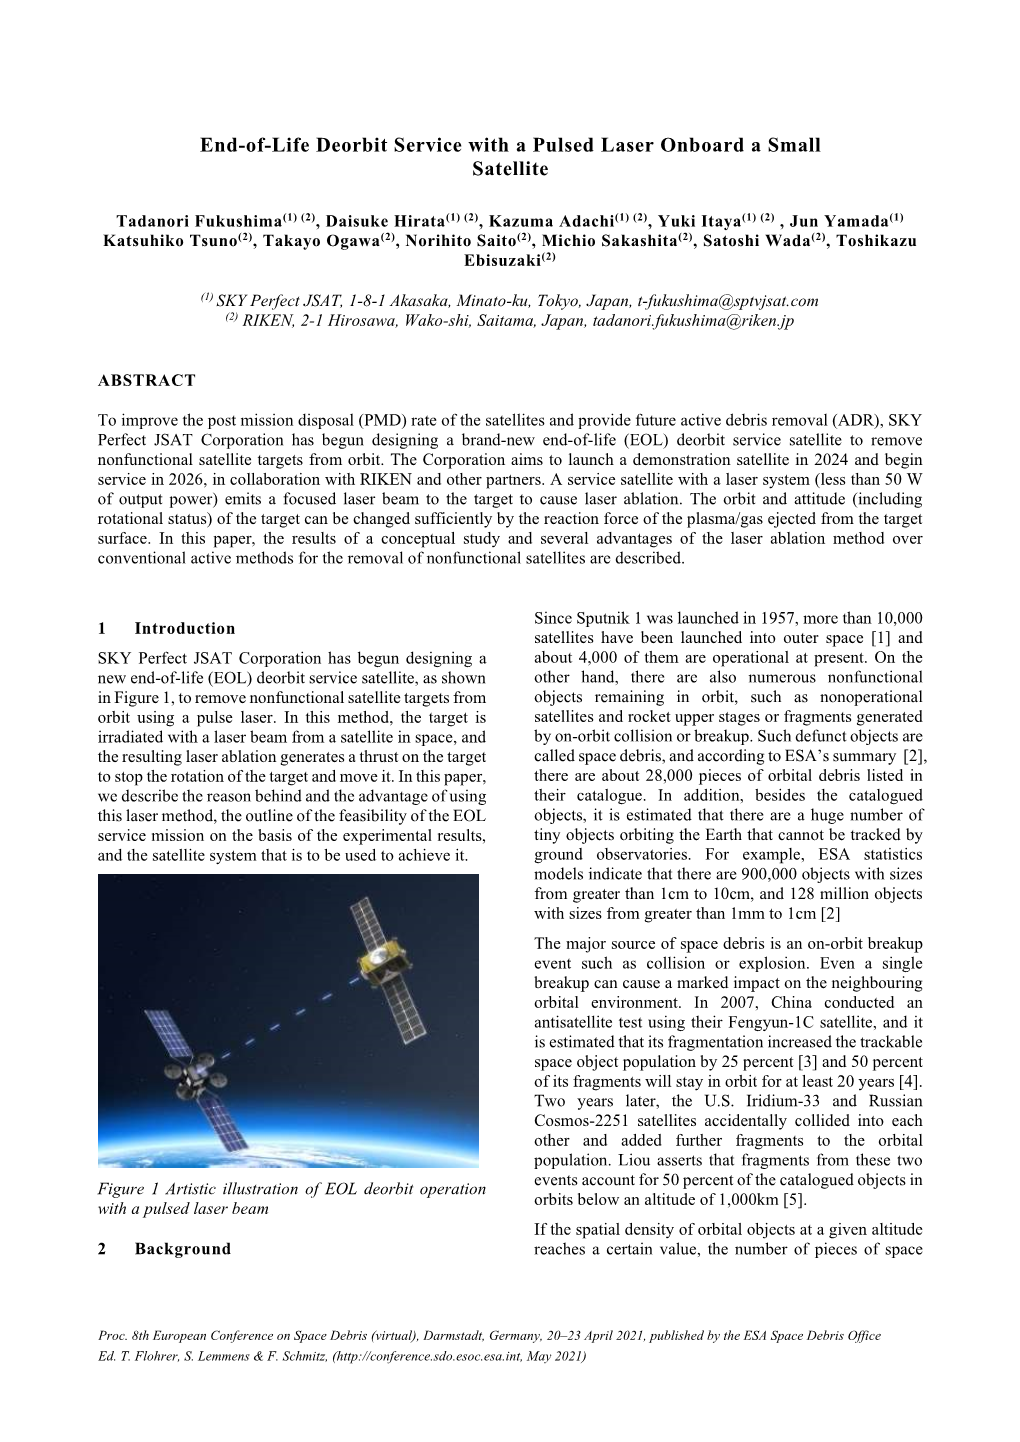 End-Of-Life Deorbit Service with a Pulsed Laser Onboard a Small Satellite